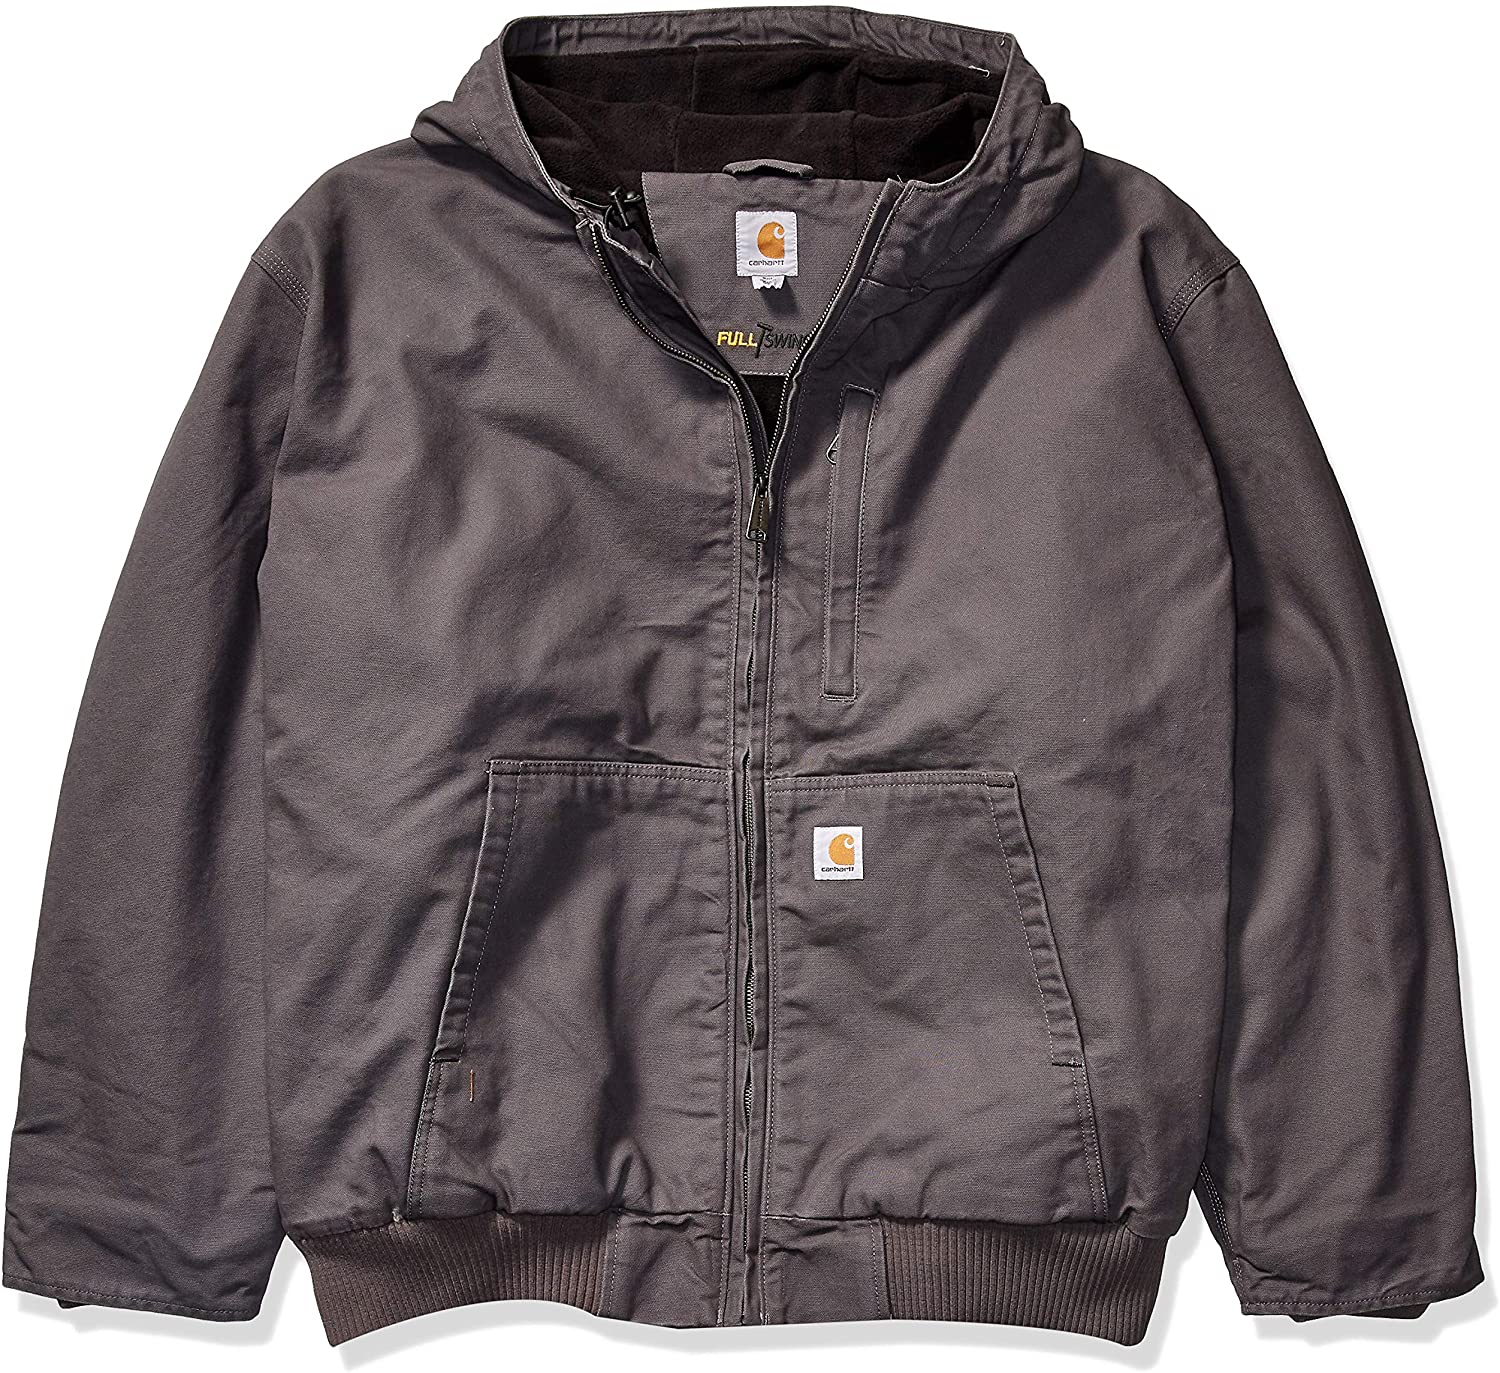 Regular and Big & Tall Sizes Carhartt Mens Full Swing Armstrong Active Jac 